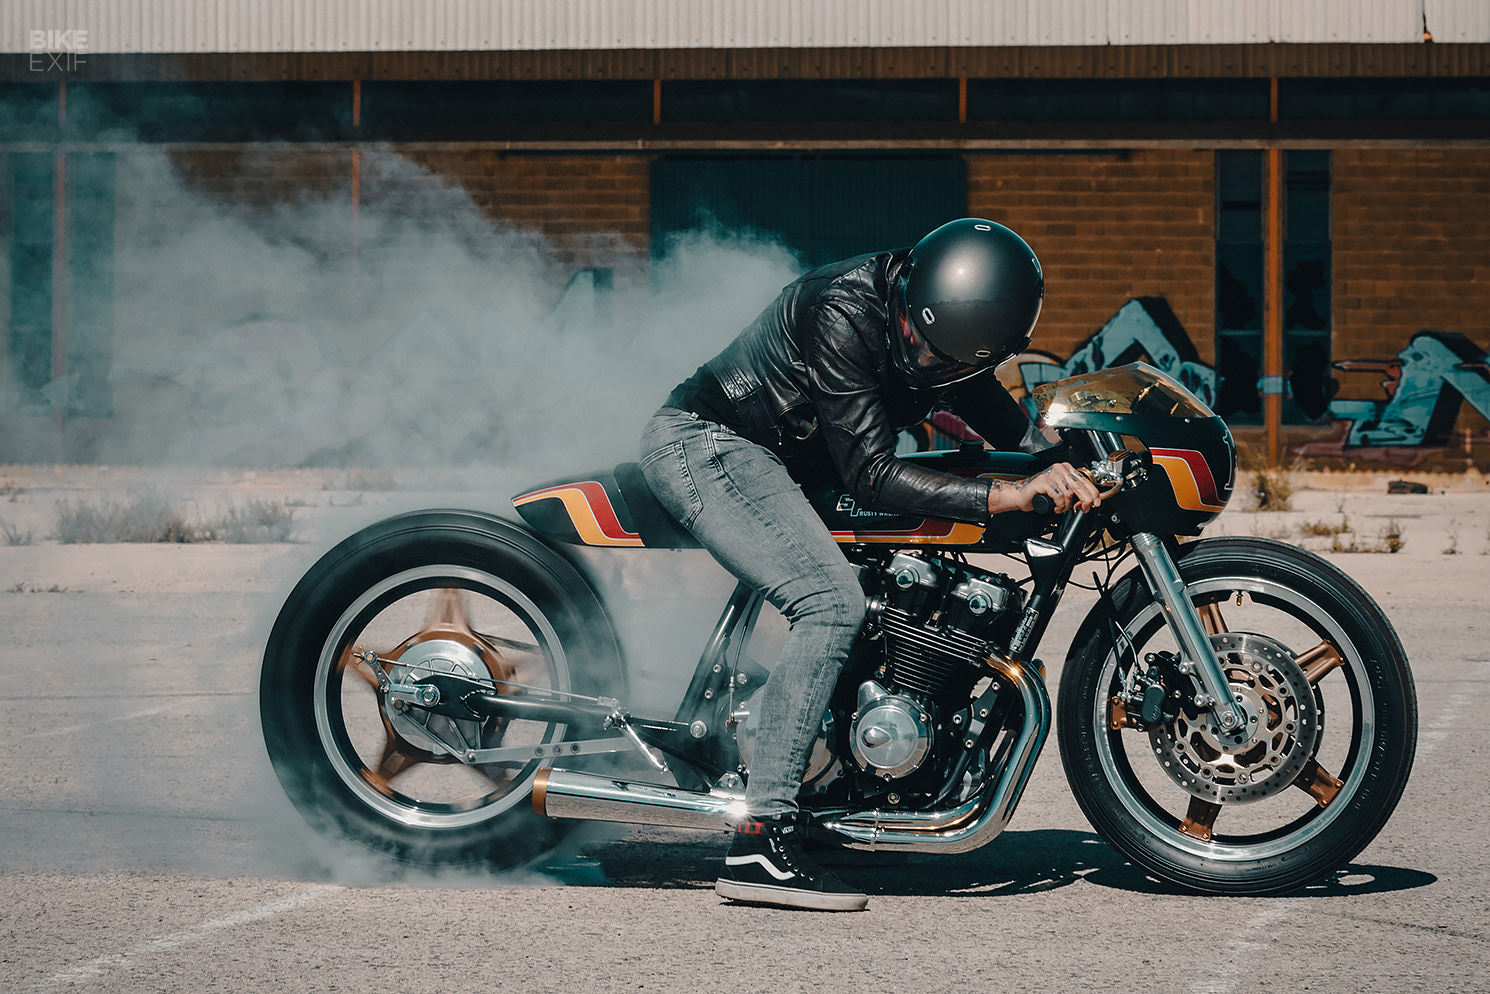 SpeedRaf: A Honda CB750 hot rod inspired by a seven-year-old | Bike EXIF